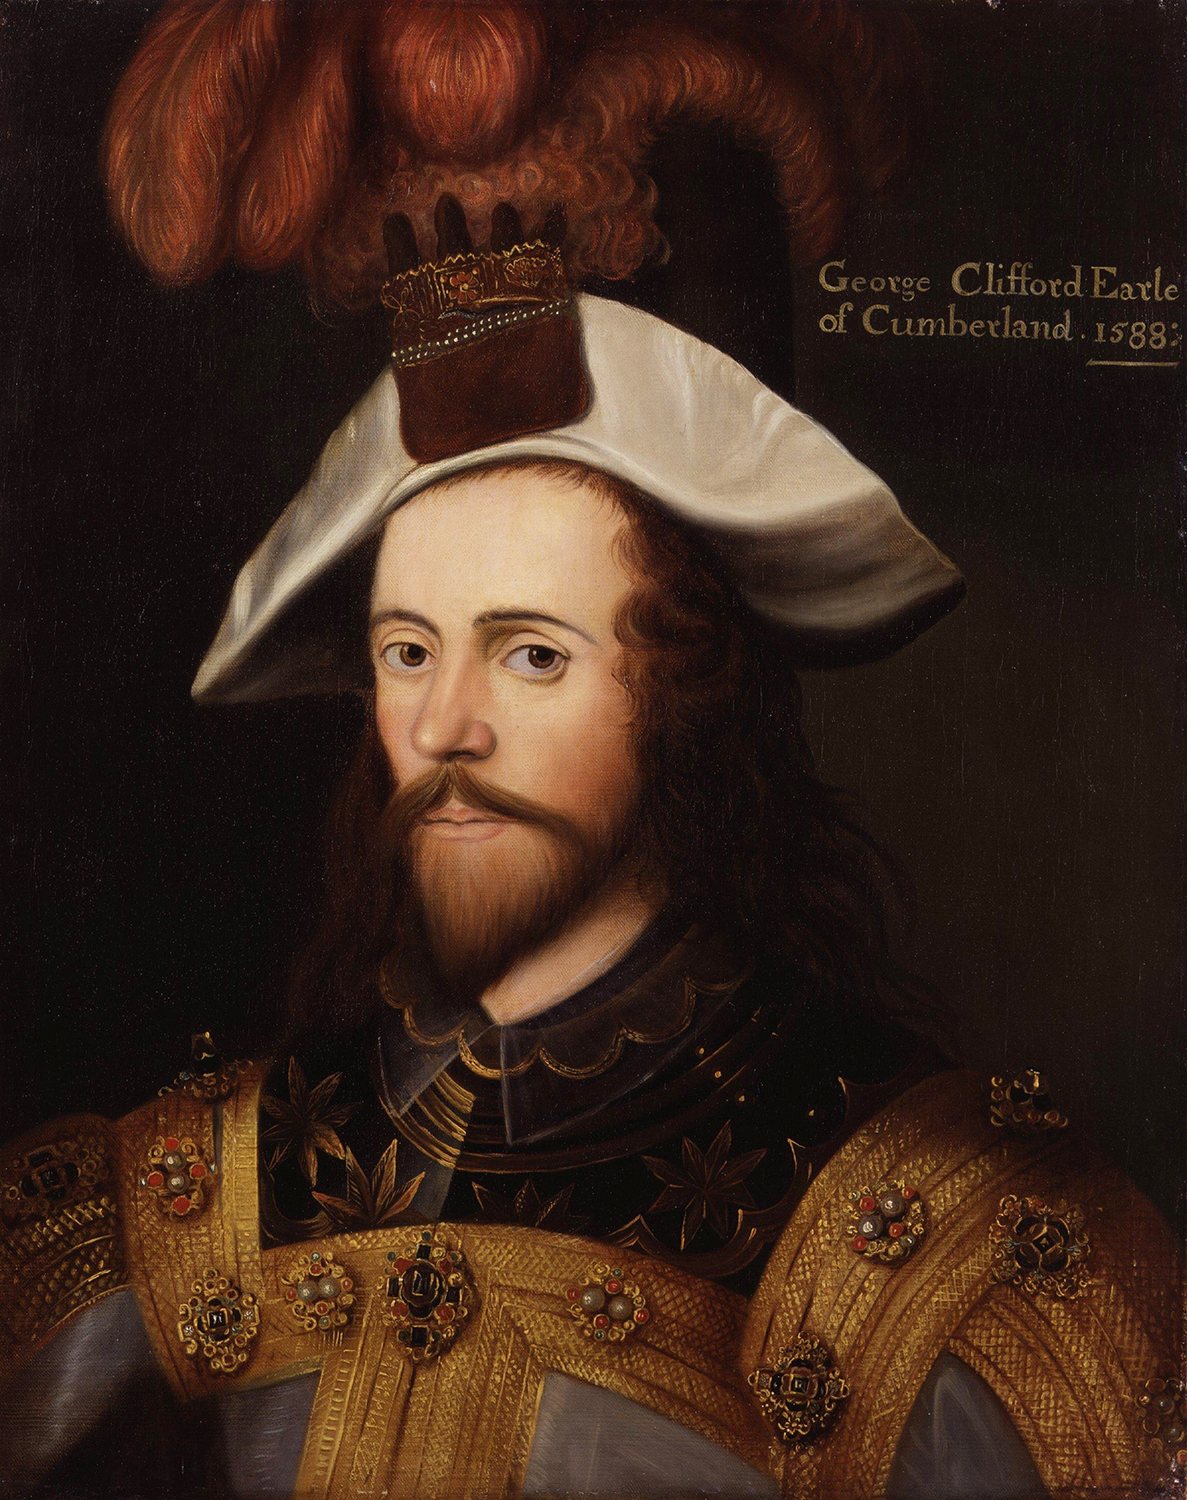 This painting after N Hilliard depicts George Clifford, 3rd Earl of Cumberland in his role as Queen’s Champion at the Tilt of 1590, wearing Queen Elizabeth I’s glove as a hat favour